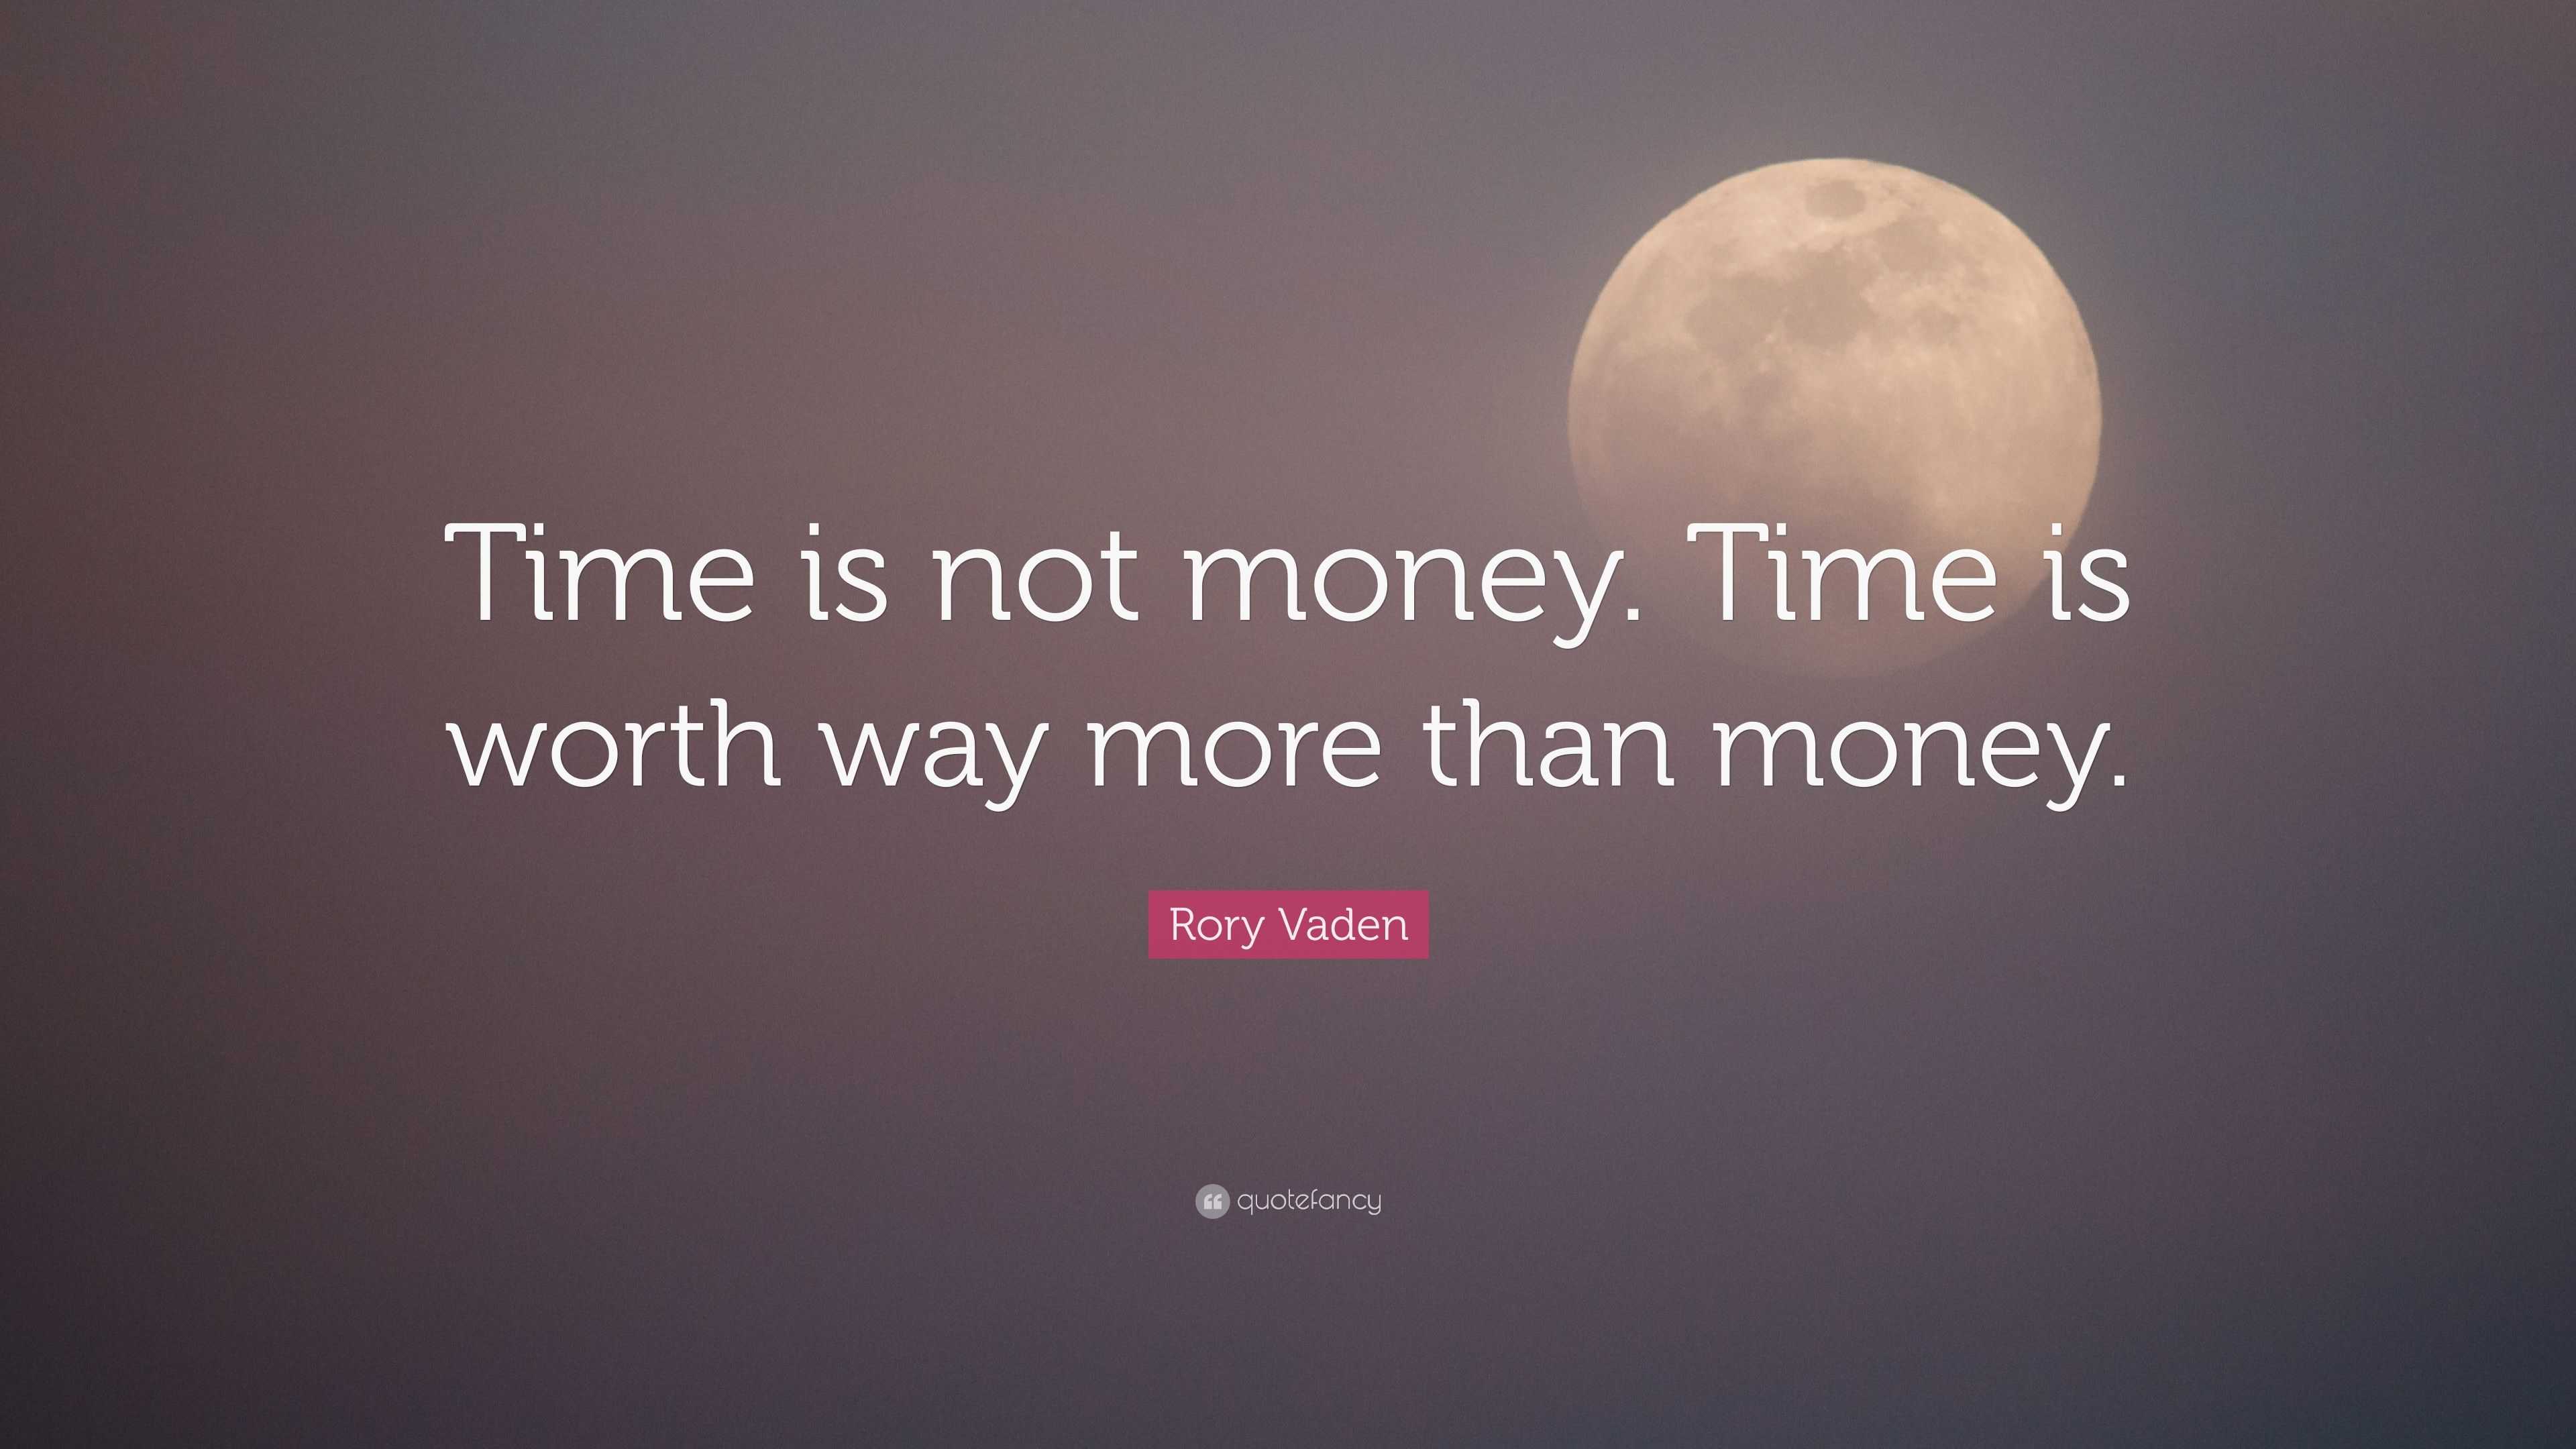 What Is Your Time Worth